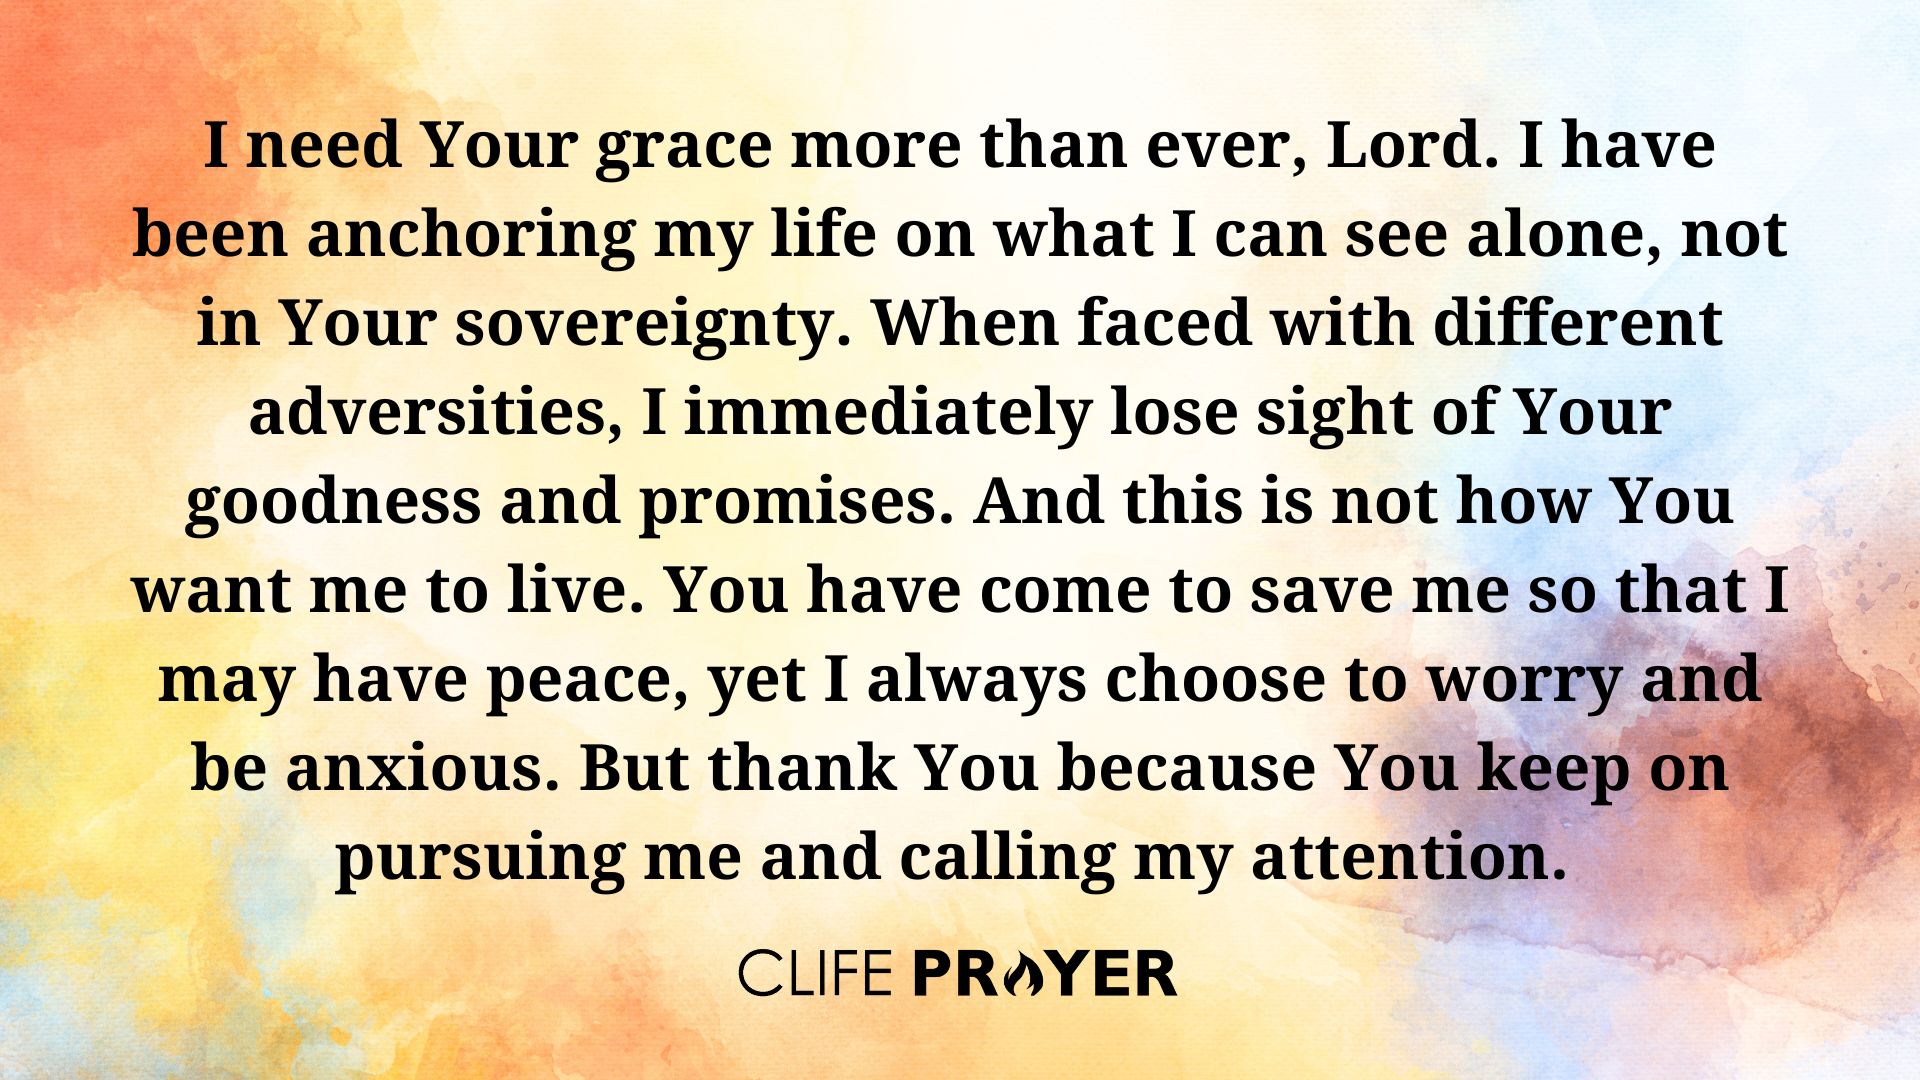 Prayer to be Reminded of God’s Promises